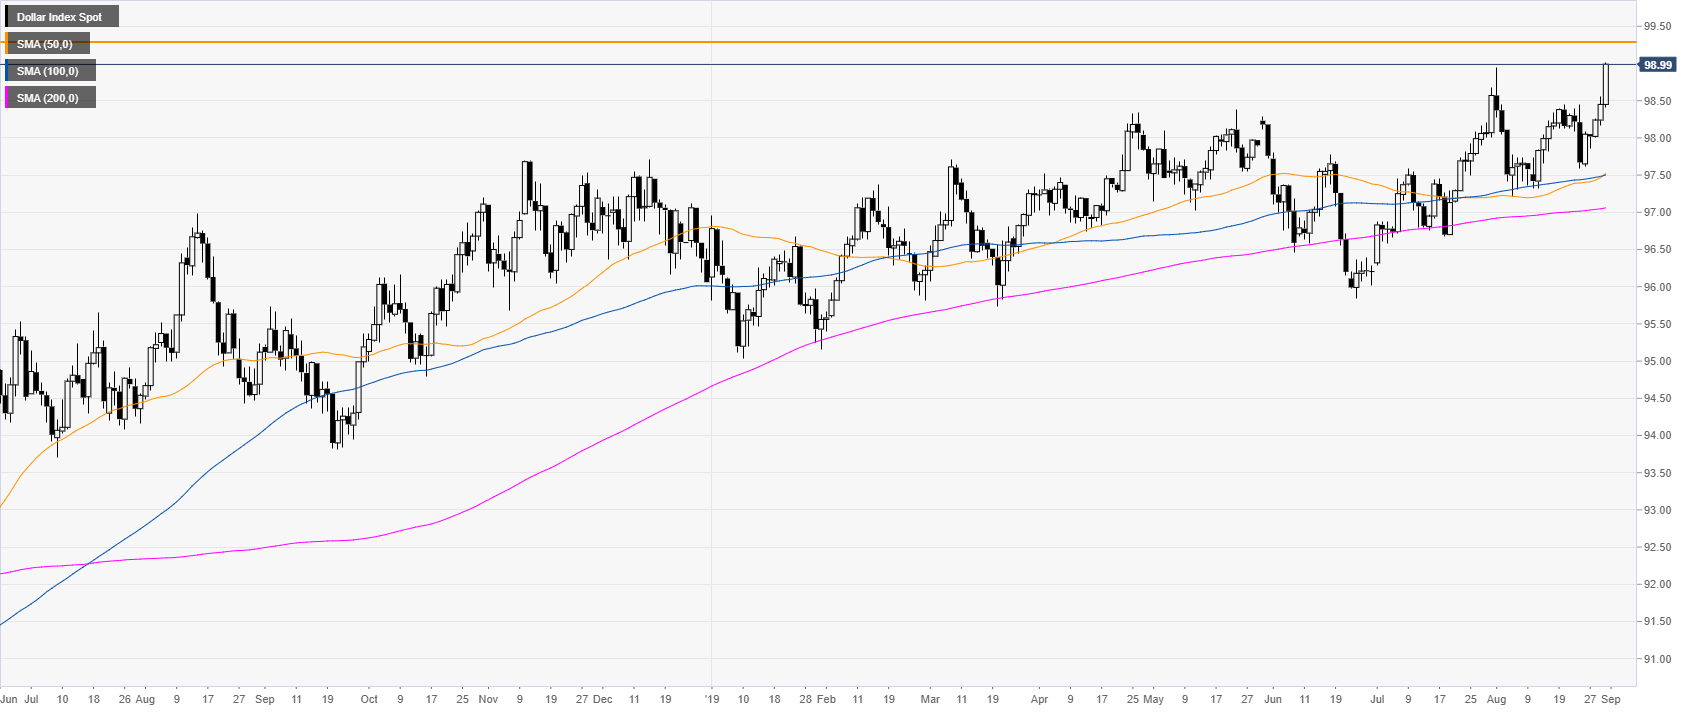 Us Dollar Index Dxy Chart